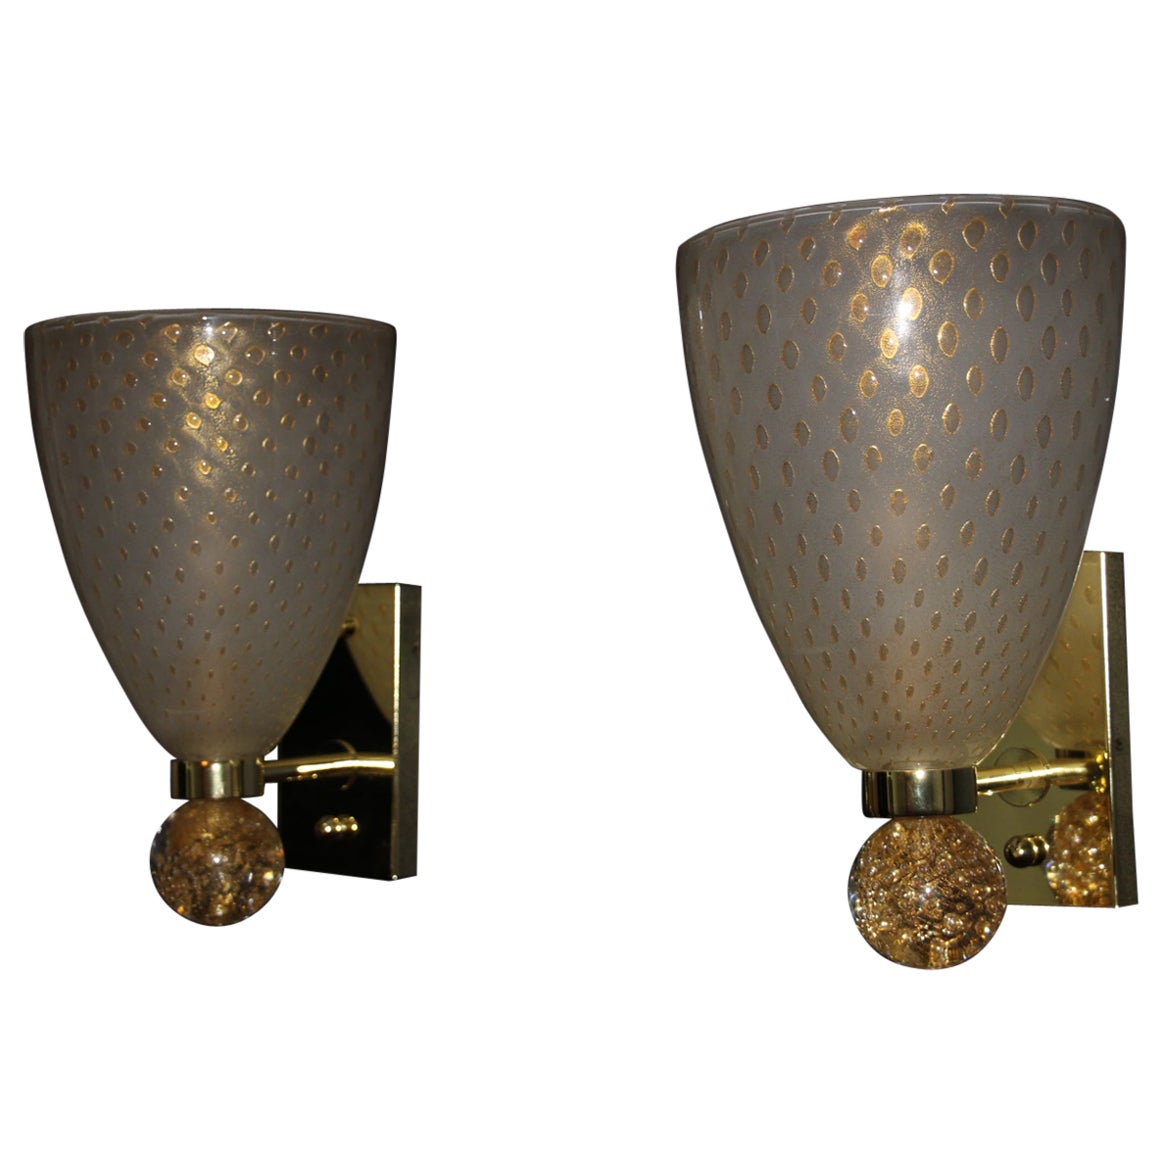 Barovier Style Murano Glass Sconces with Golden Flakes and Bubbles, Wall Lights For Sale